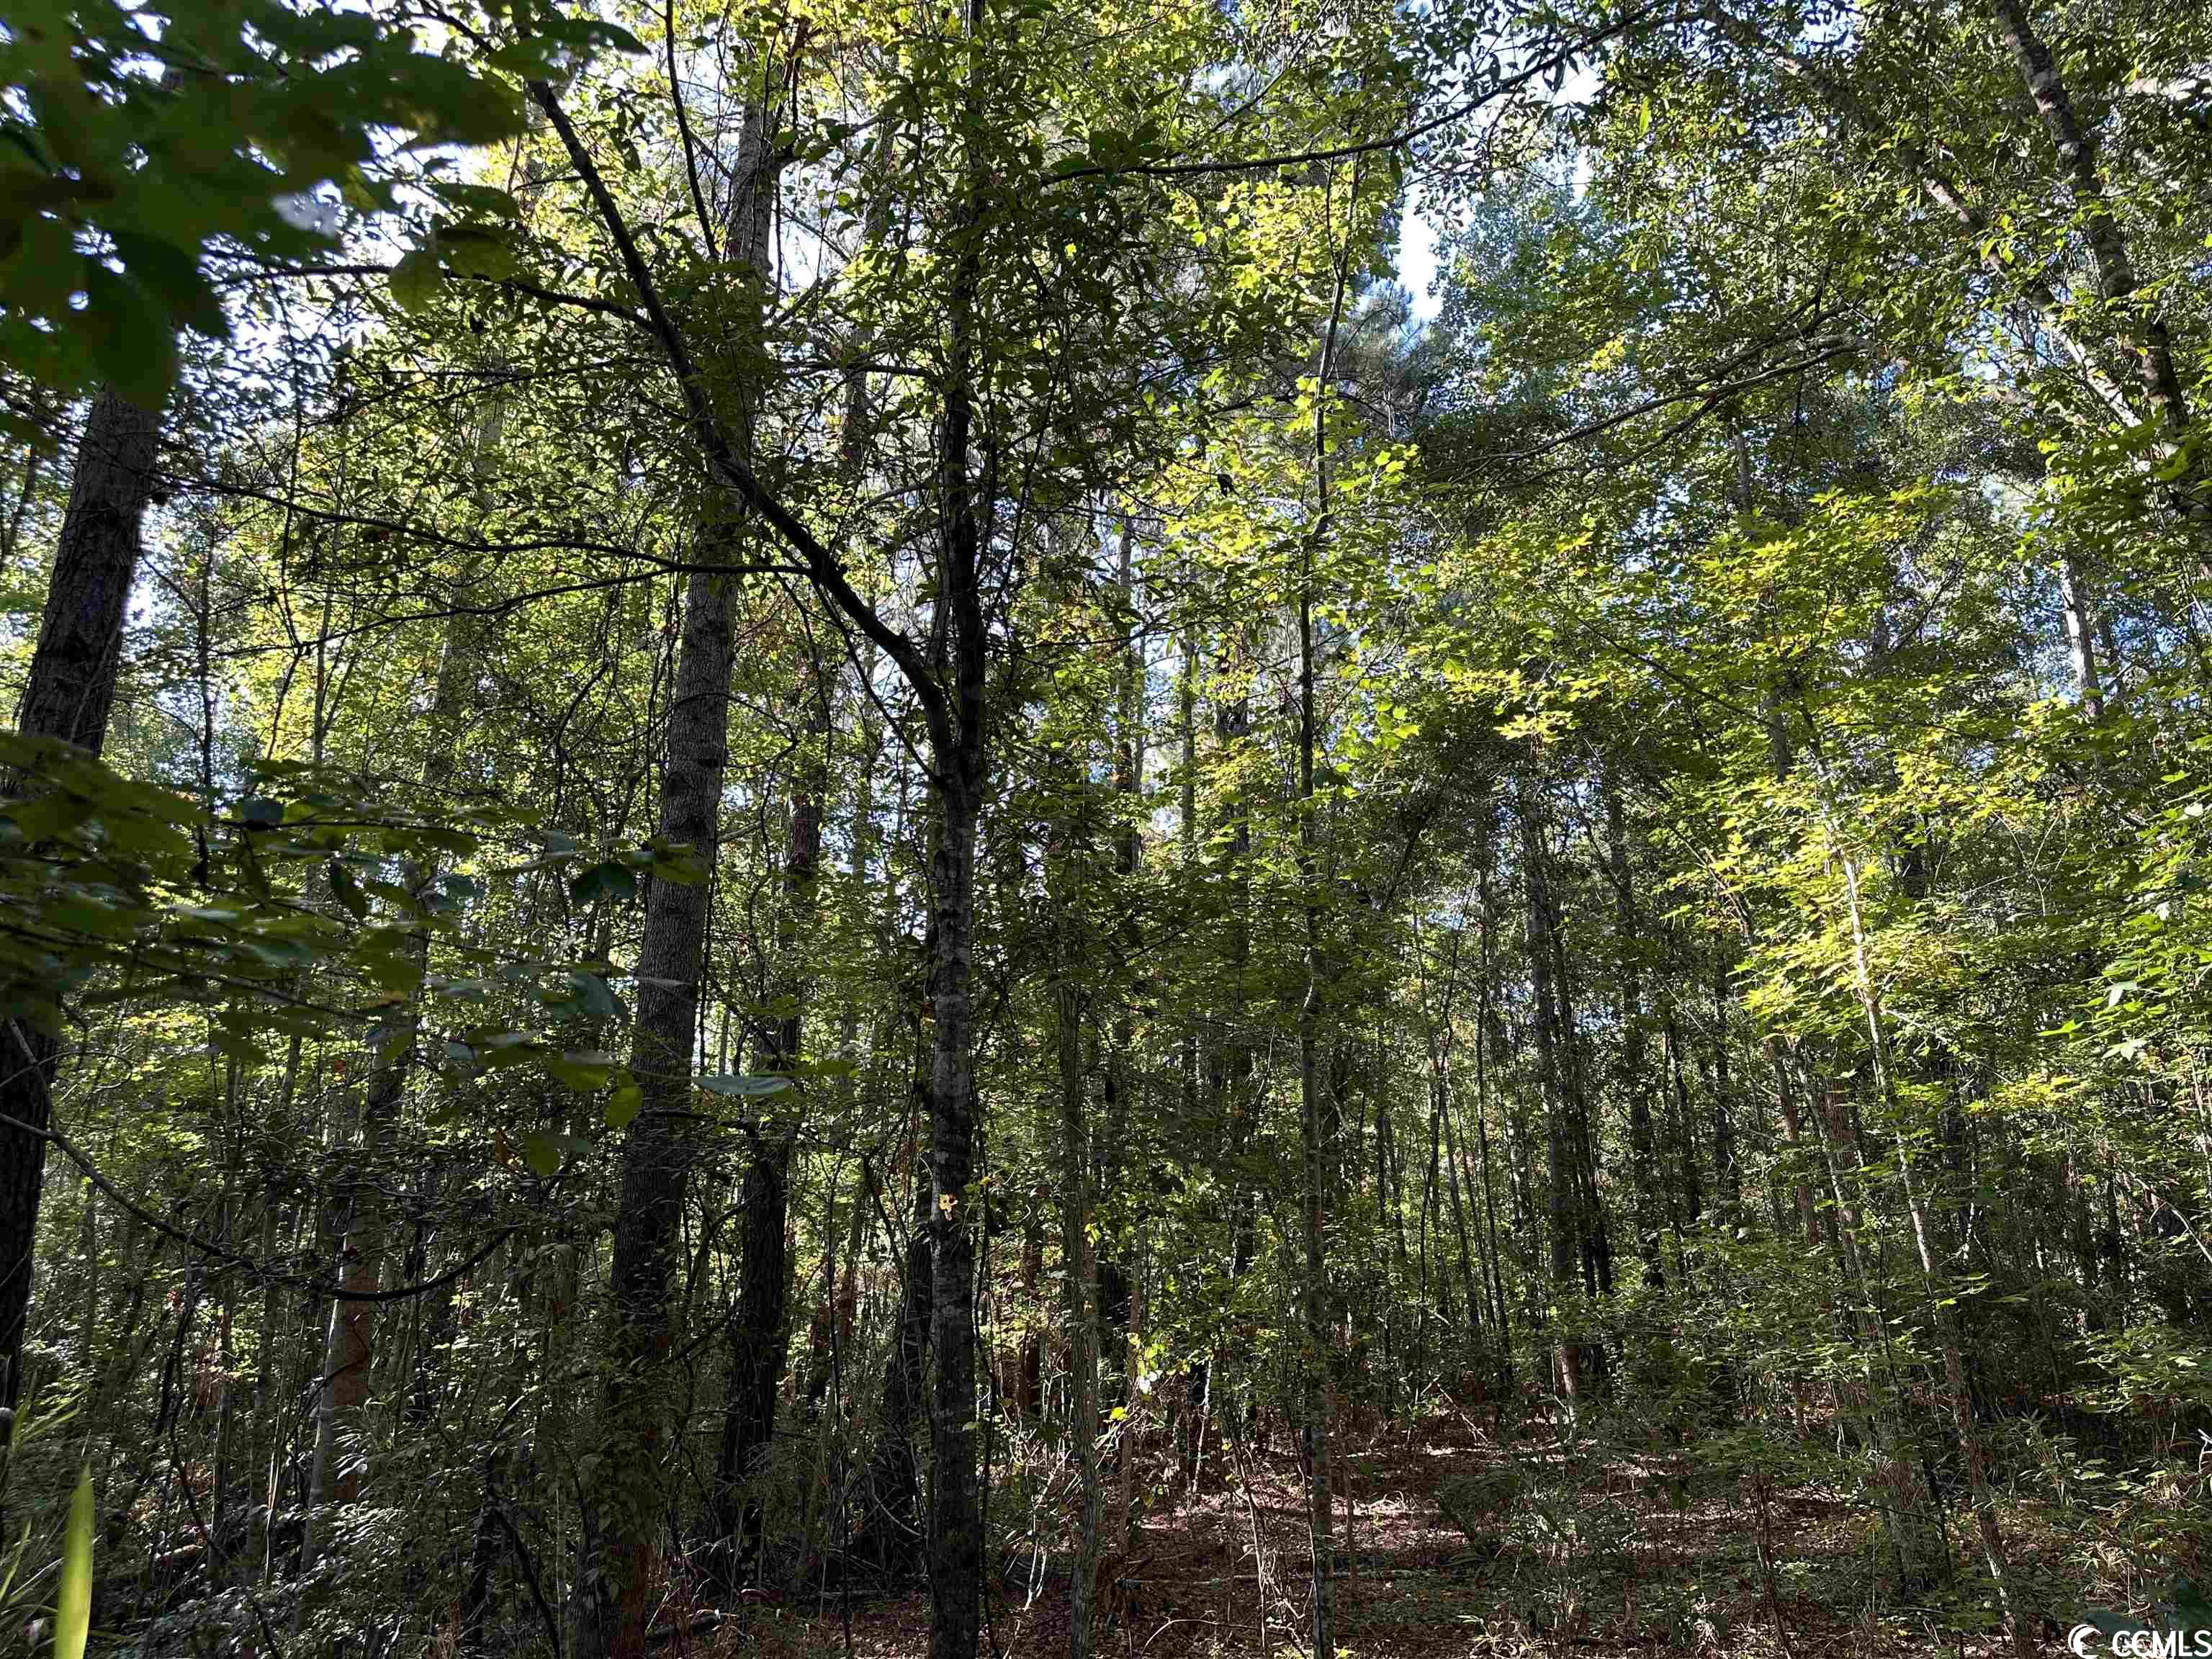 nearly 2 acres available on georgetown highway between andrews and georgetown. the property is entirely wooded, and is surrounded by other wooded tracts. the property total 1.74 acres and would make a great place for a home at the midpoint between andrews and georgetown.